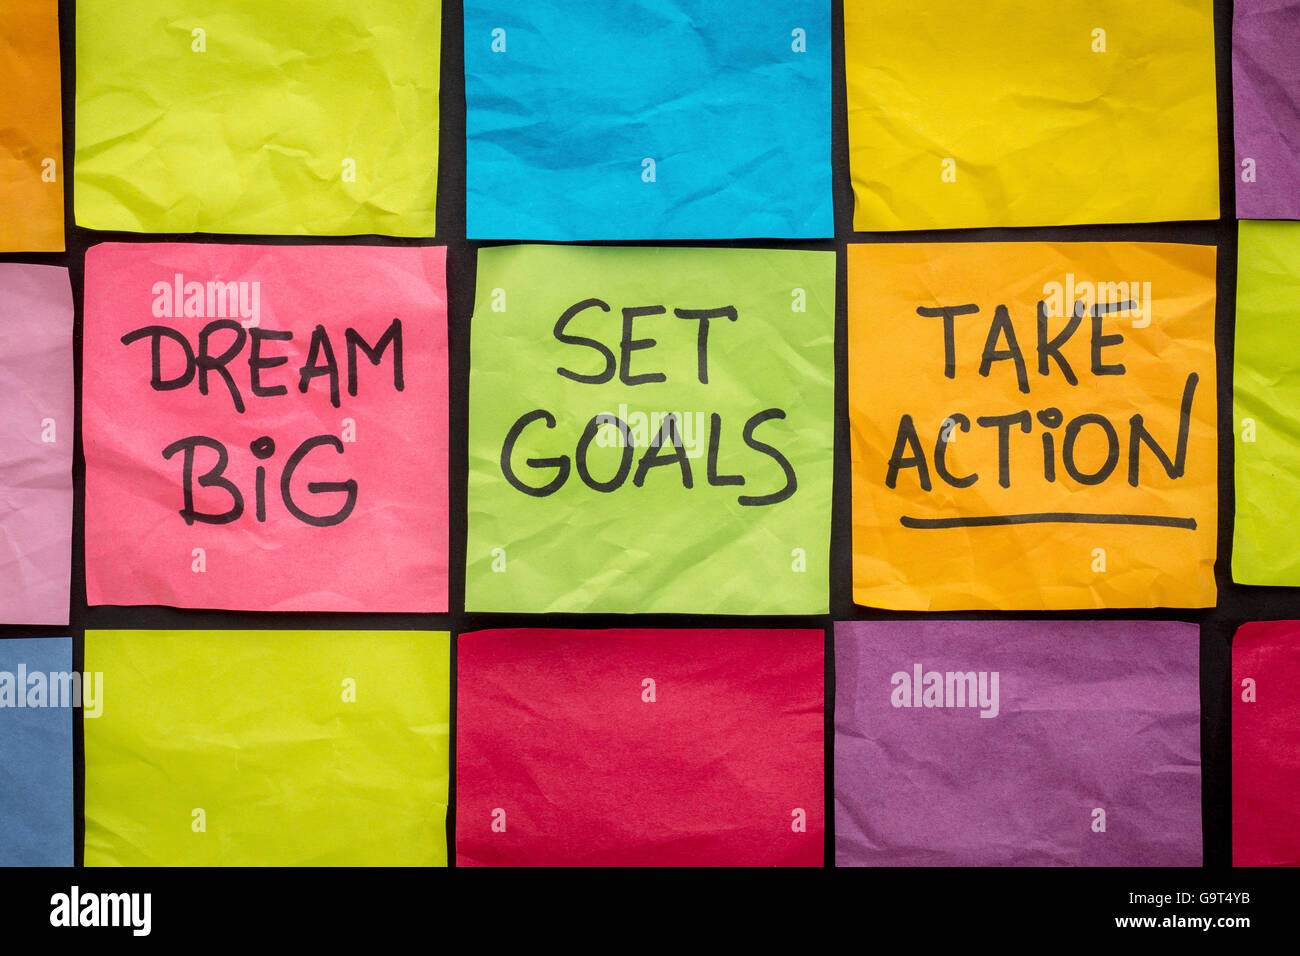 dream big, set goals, take action - motivational advice or reminder on colorful sticky notes Stock Photo